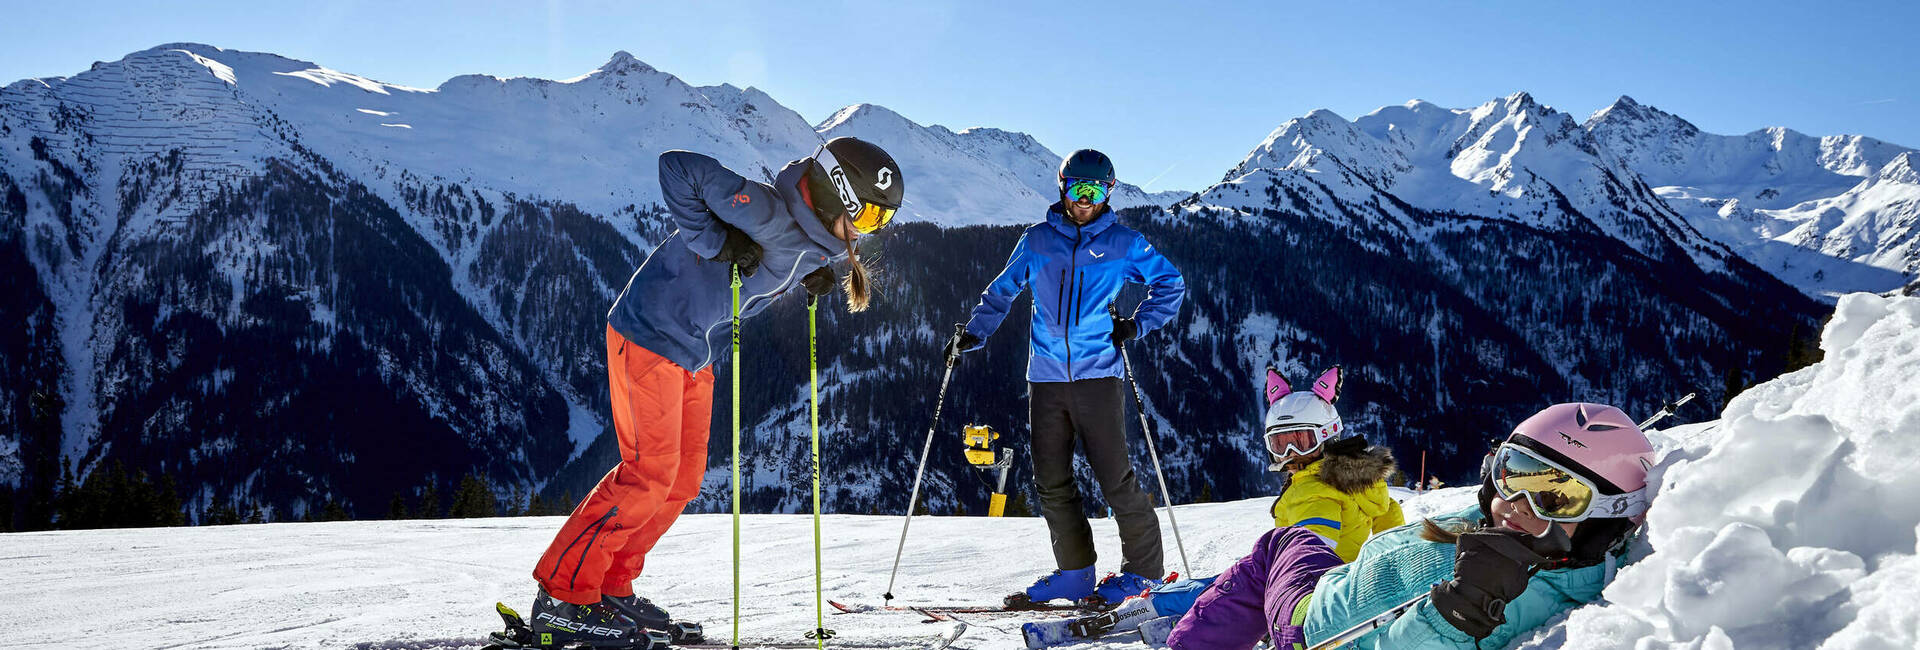  Unlimited skiing fun for the whole family